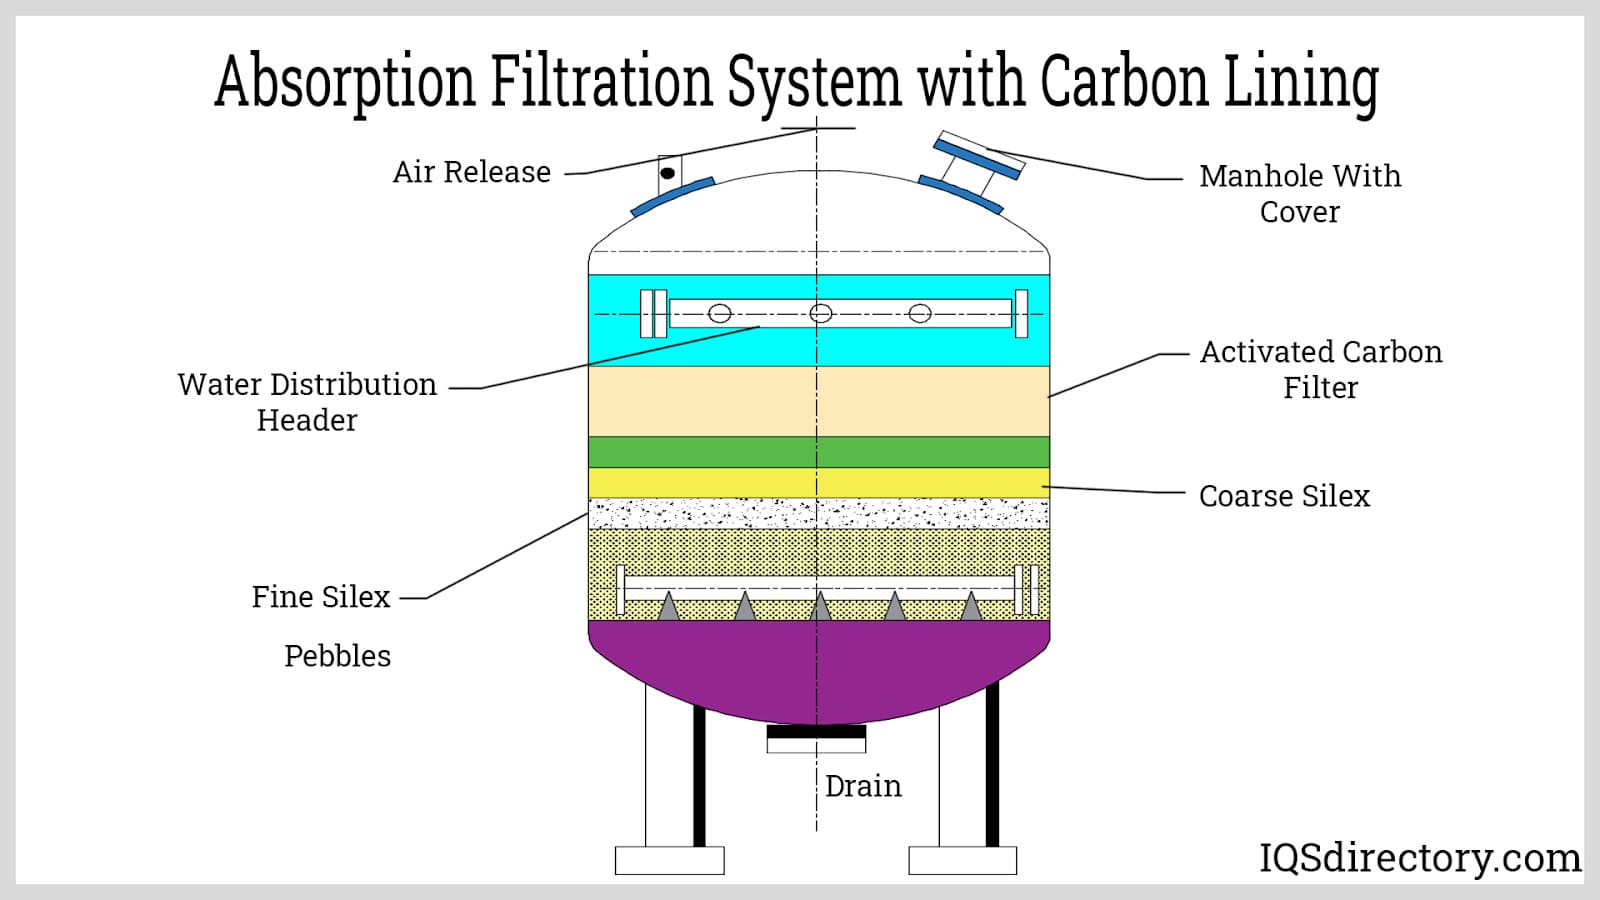 Absorption Filtration System with Carbon Lining